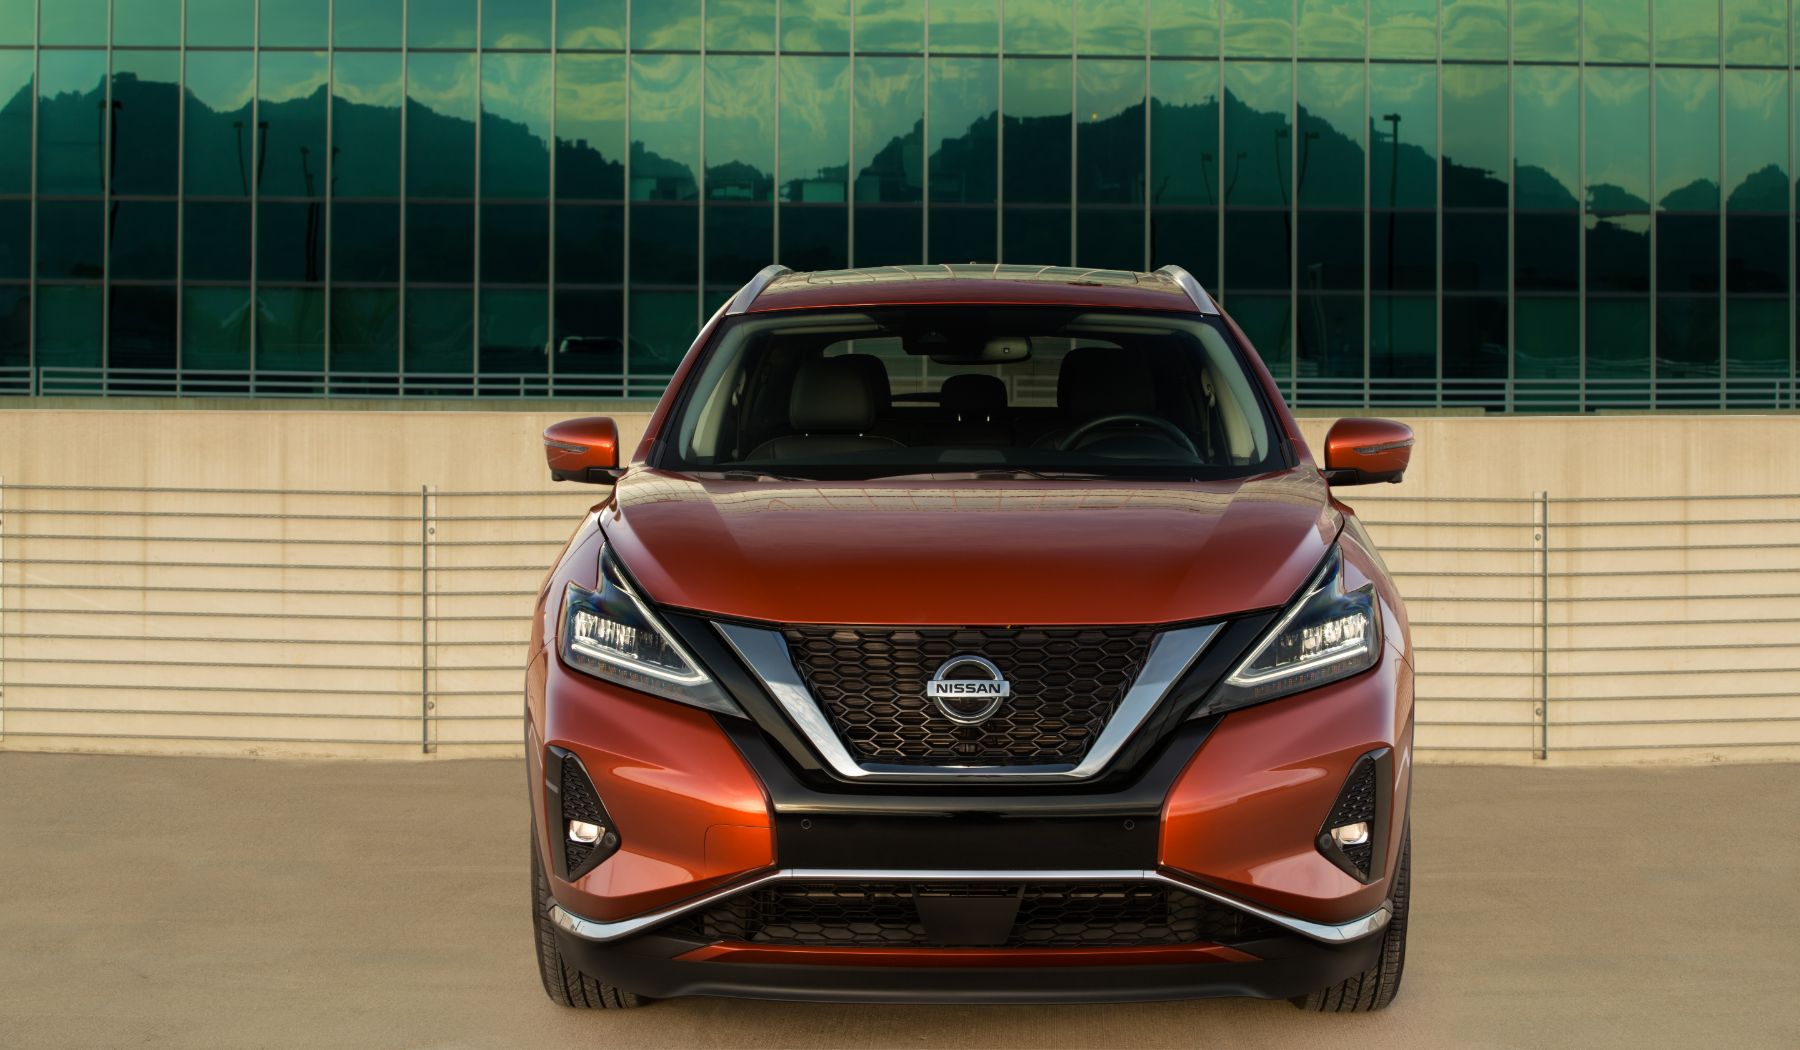 2023 Nissan Murano Pricing Revealed, Base Trim Level Costs 33,660